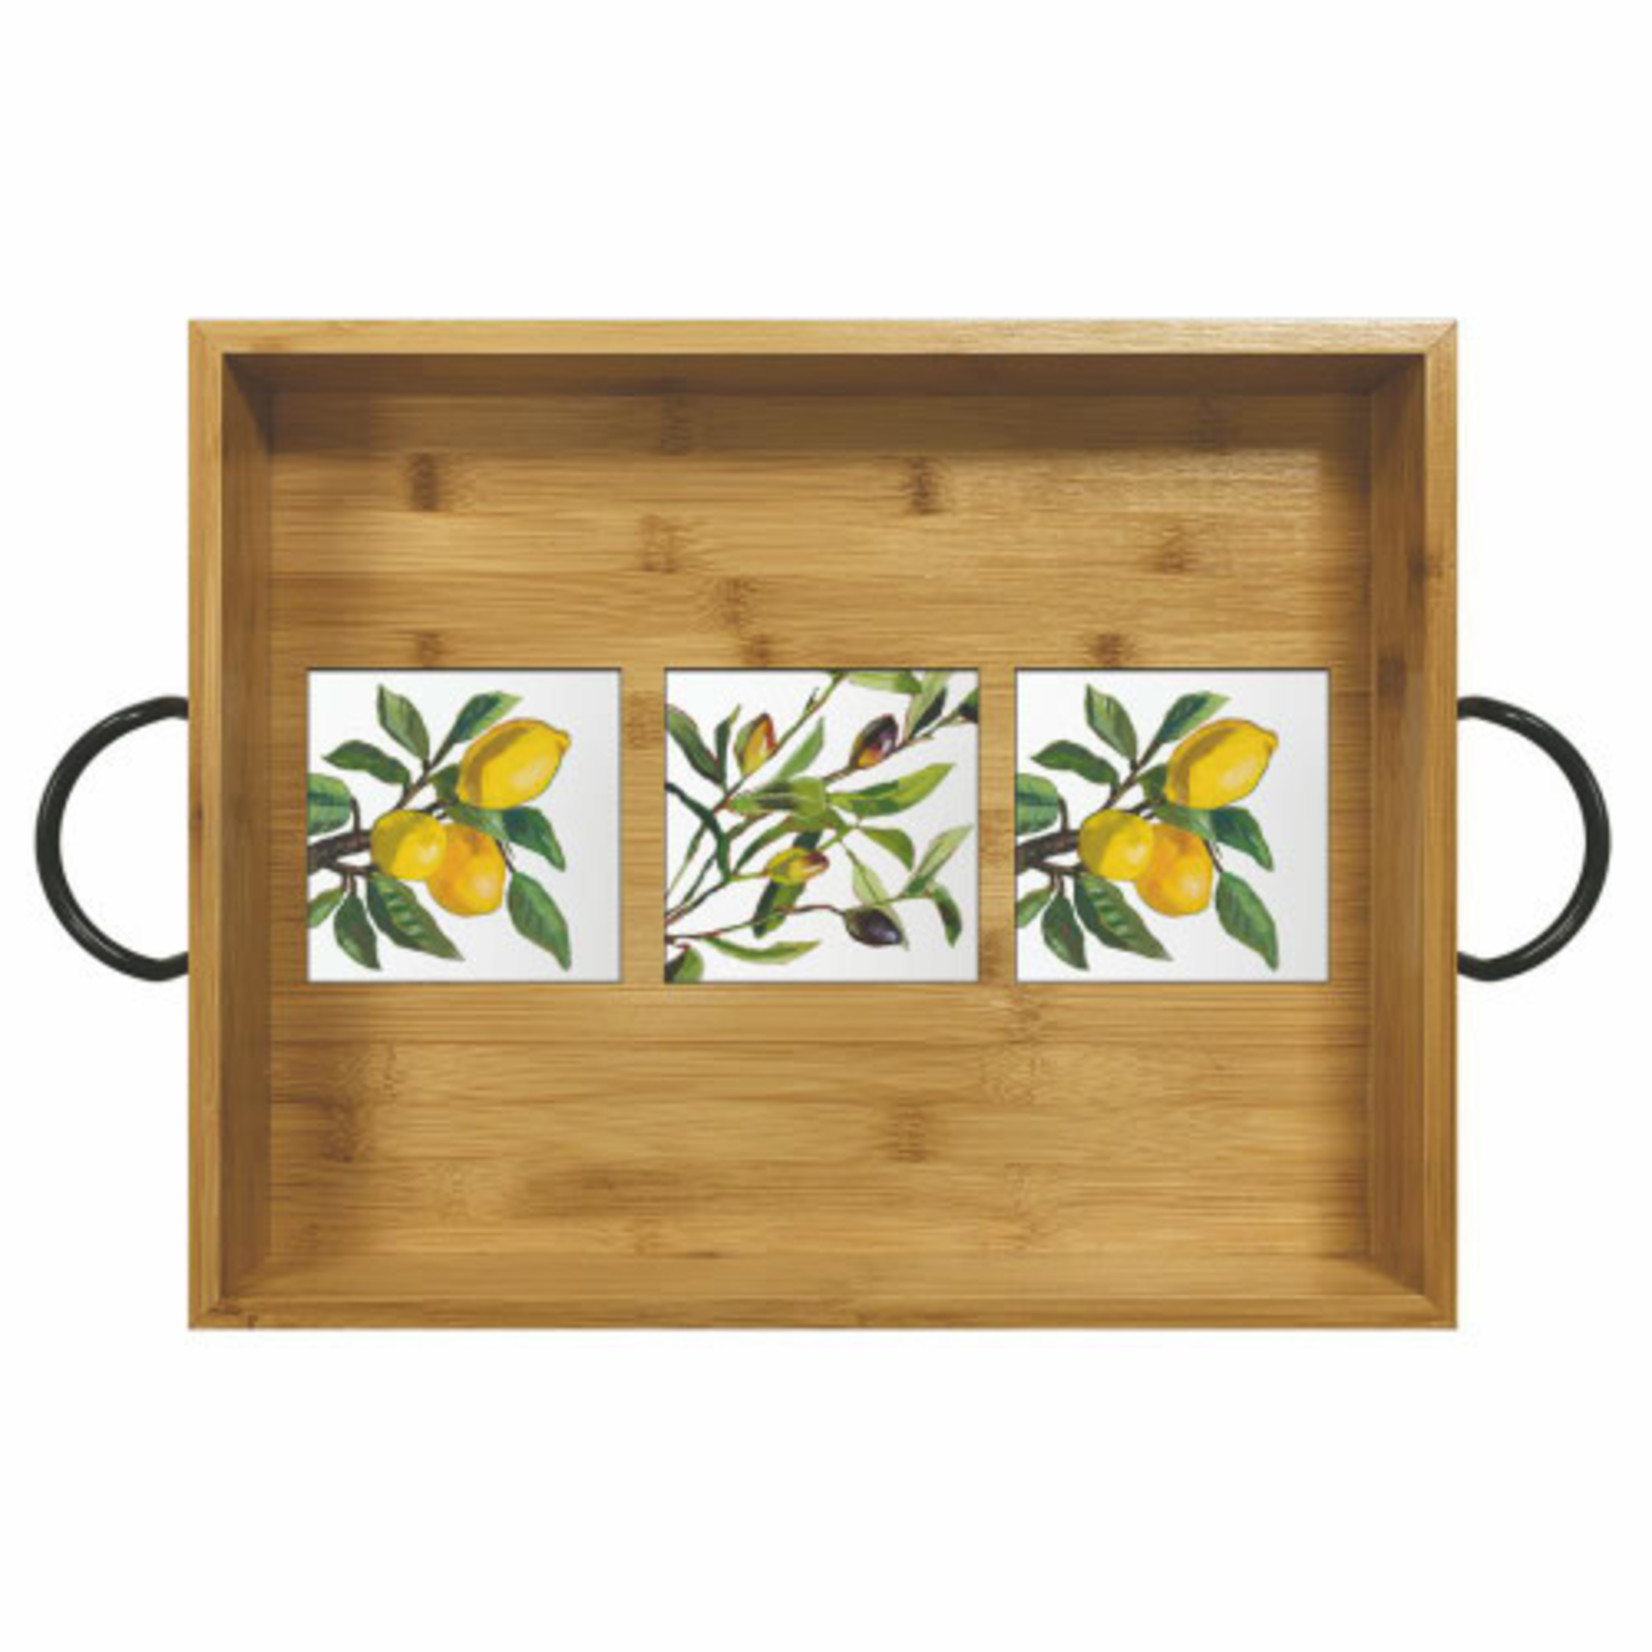 PAPER PRODUCTS DESIGN PPD Bamboo Serving Tray - Lemons/Olives Musee